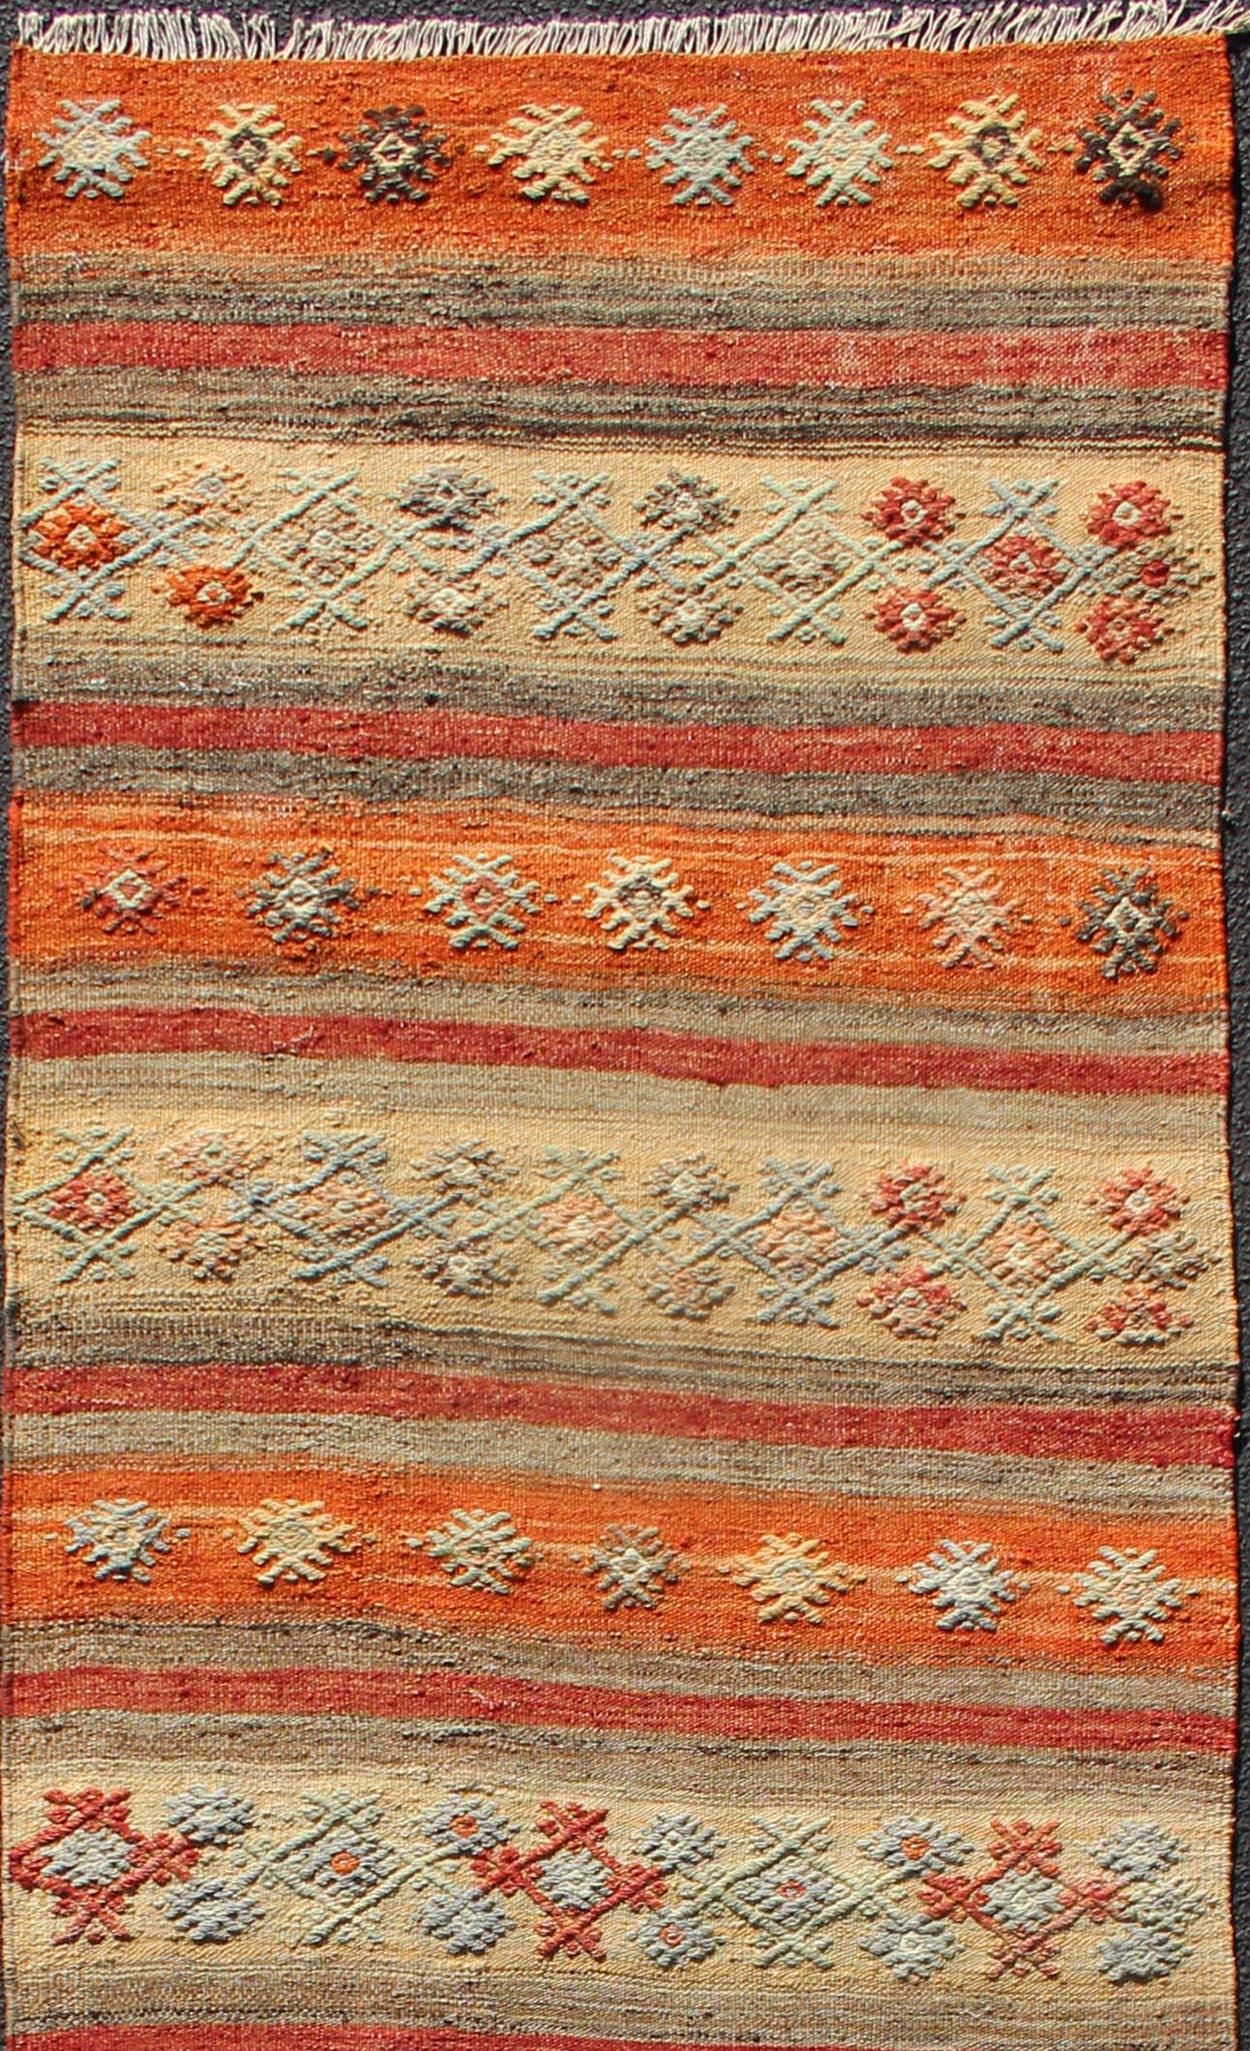 Vintage Turkish Kilim runner with horizontal stripes and scattered geometric shapes in embroideries, rug ned-124, country of origin / type: Turkey / Kilim, circa mid-20th century

Featuring geometric shapes rendered in a repeating horizontal